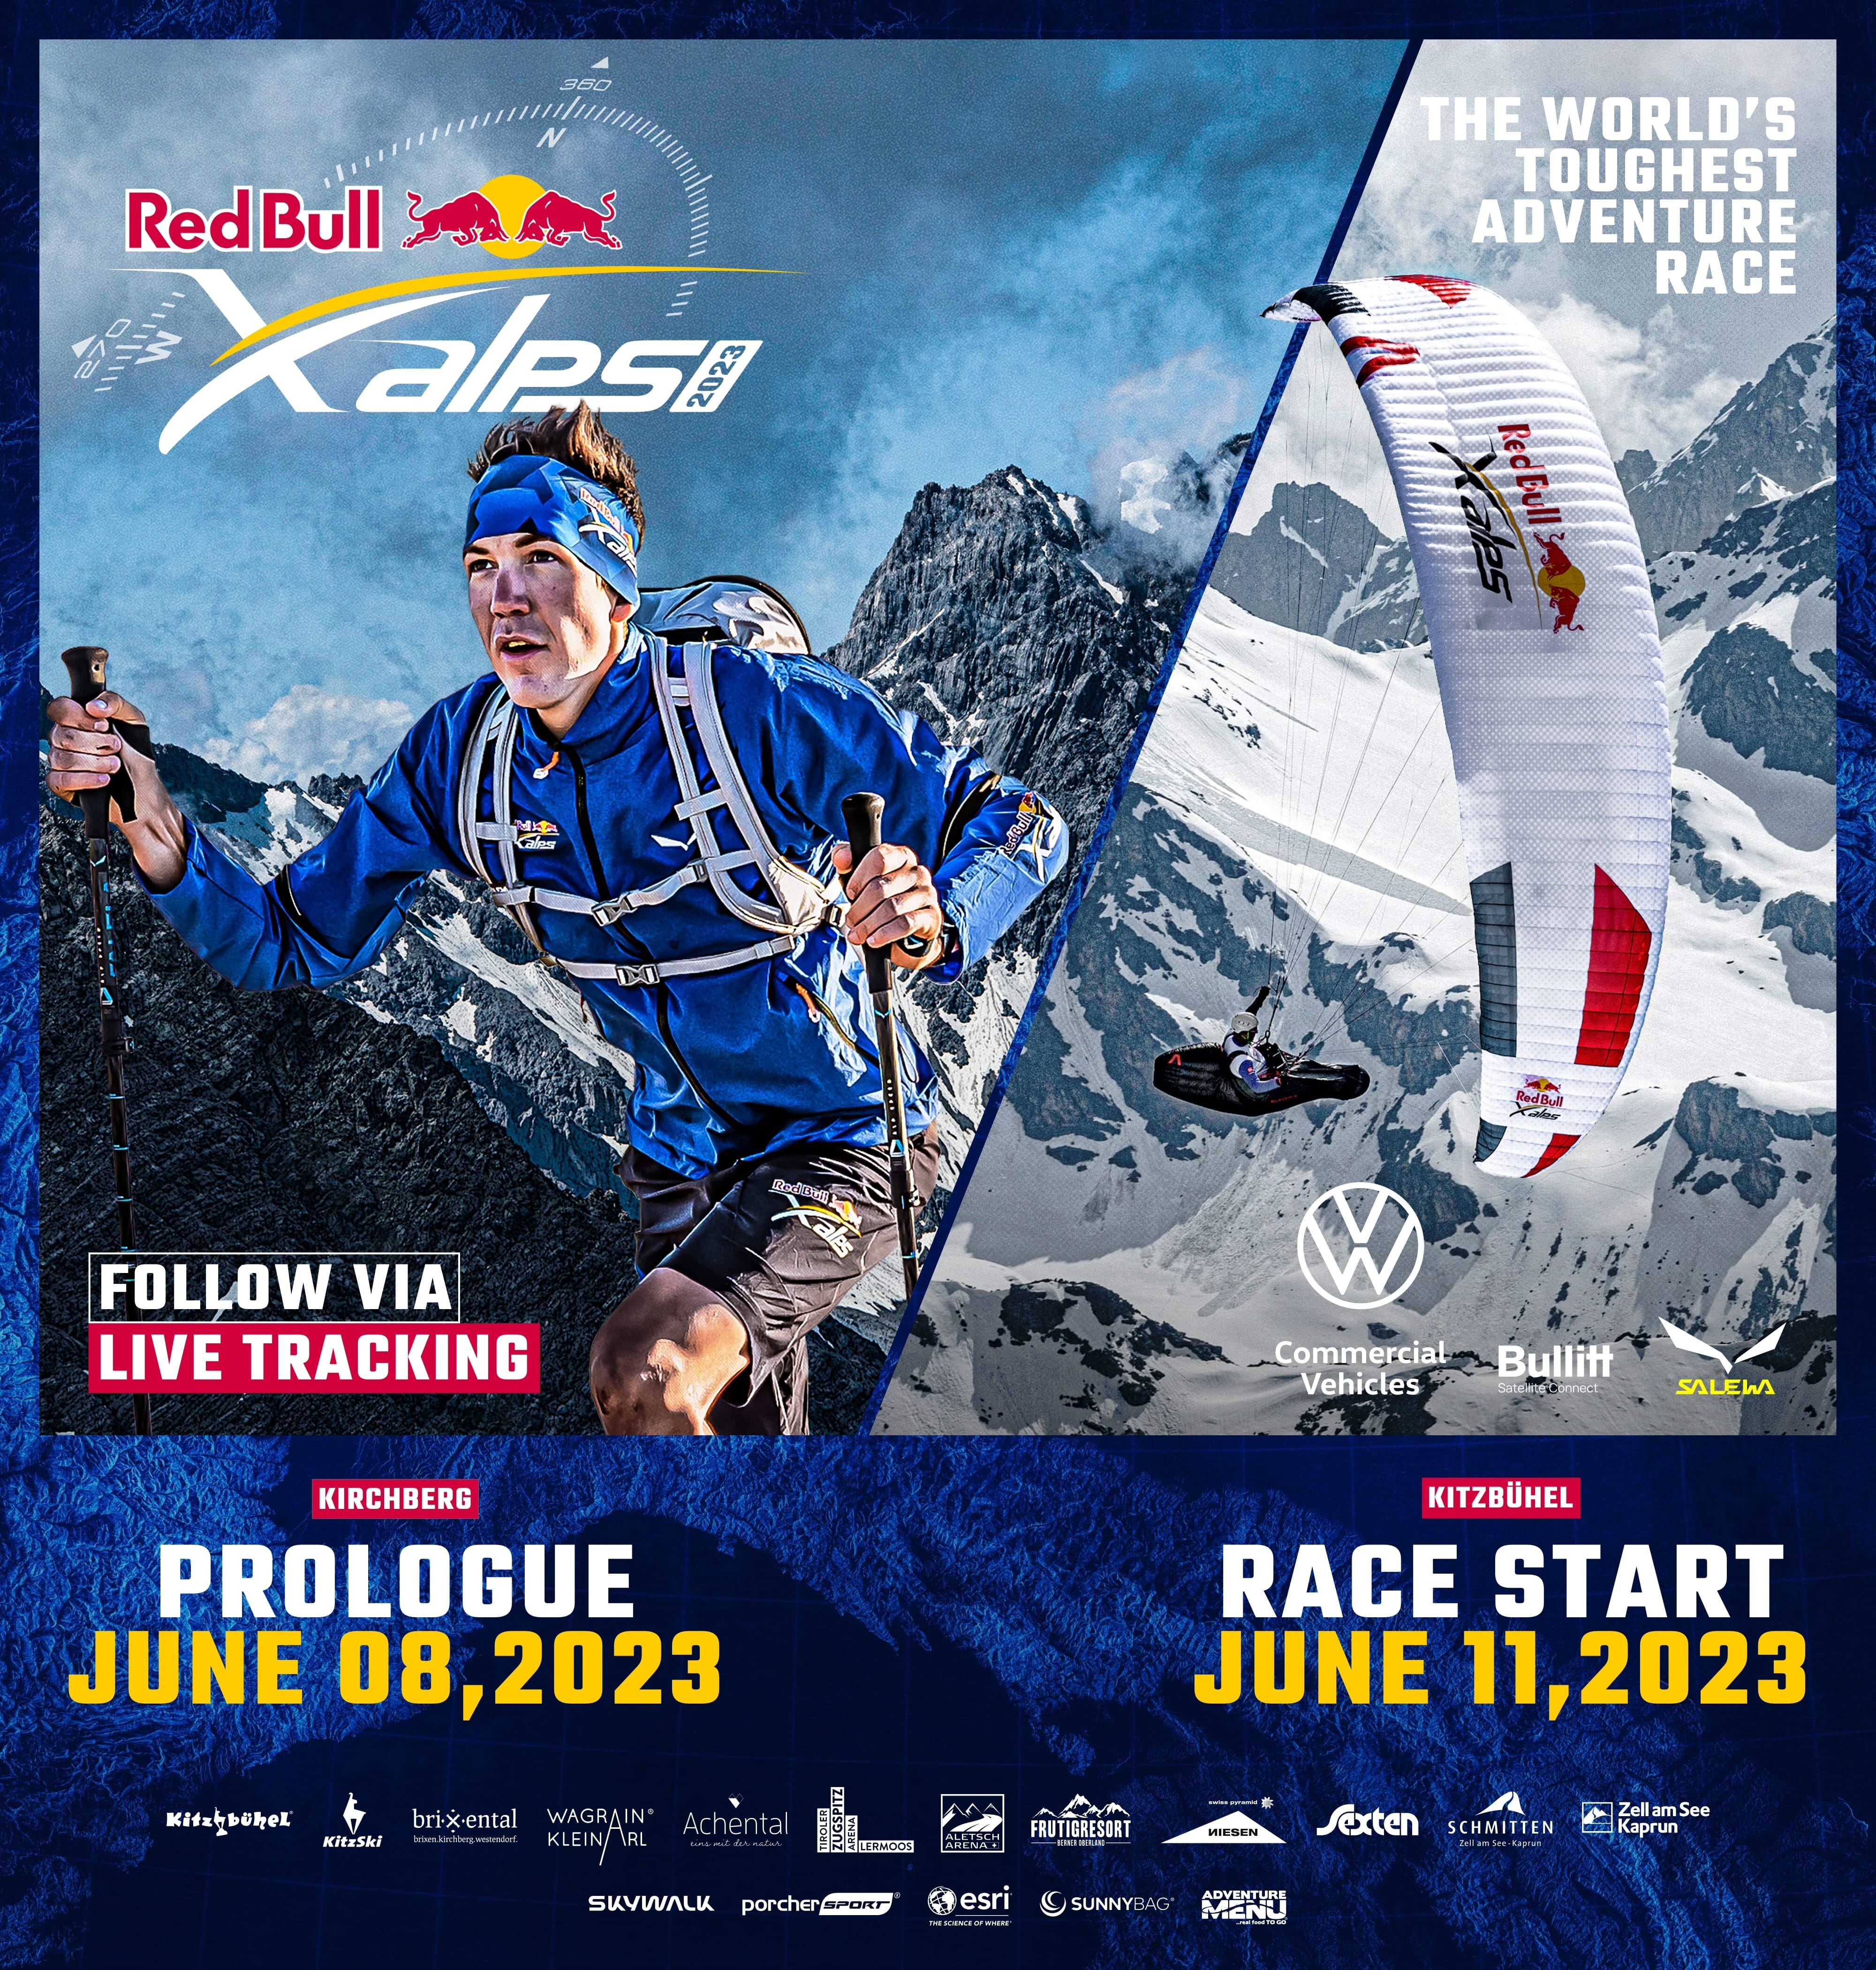 red bull x alps pre prologue holding graphic mobile